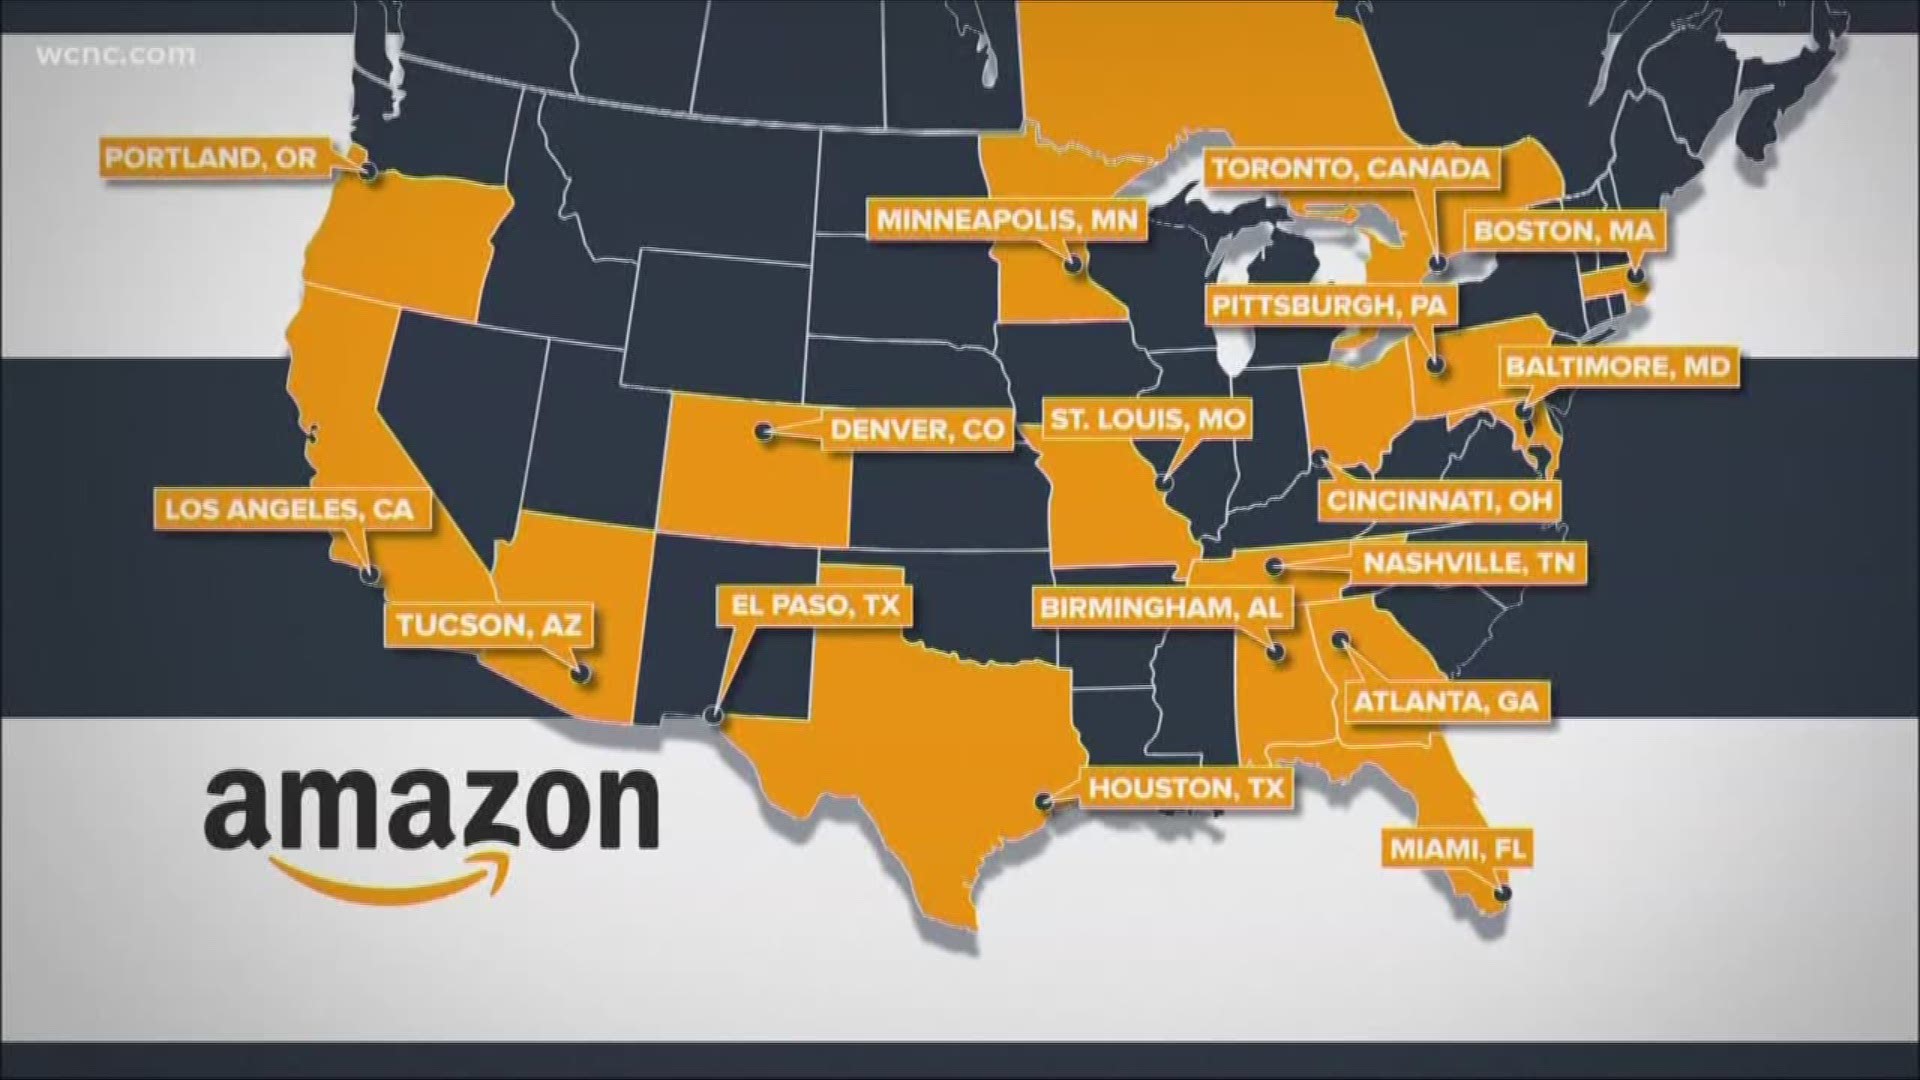 The national race is on to be the home of amazon's second headquarters.